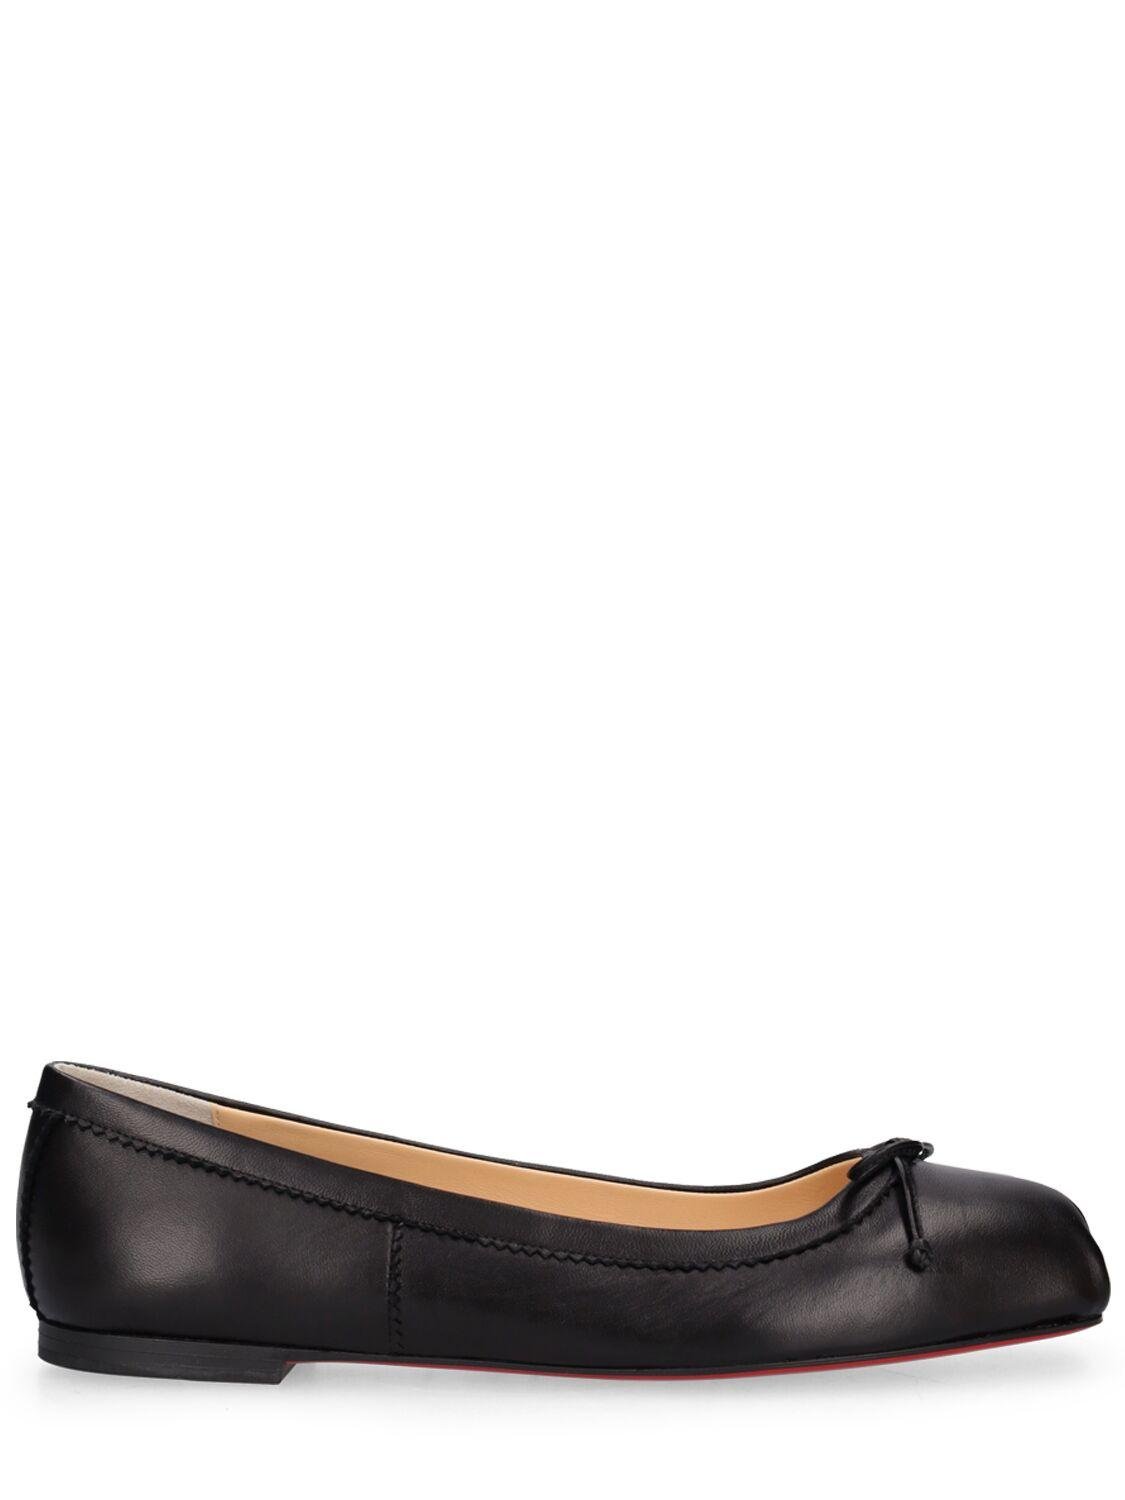 10mm Mamadrague Leather Ballerina Flats by CHRISTIAN LOUBOUTIN